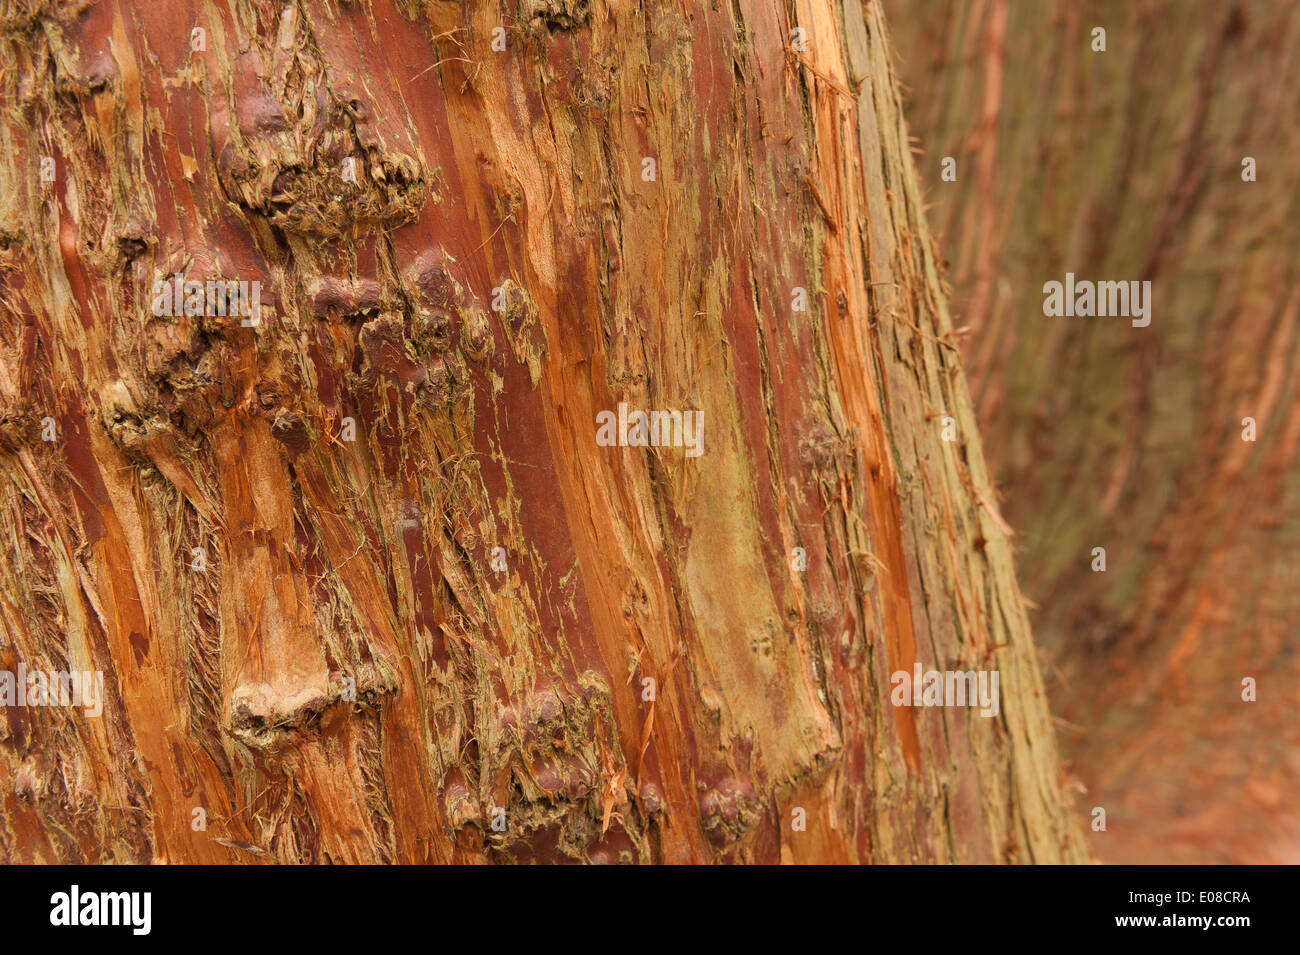 Flaky soft rich orange brown reddish pink fibrous bark on trunk of Cupressus japonica Japanese cedar peels in vertical strips Stock Photo